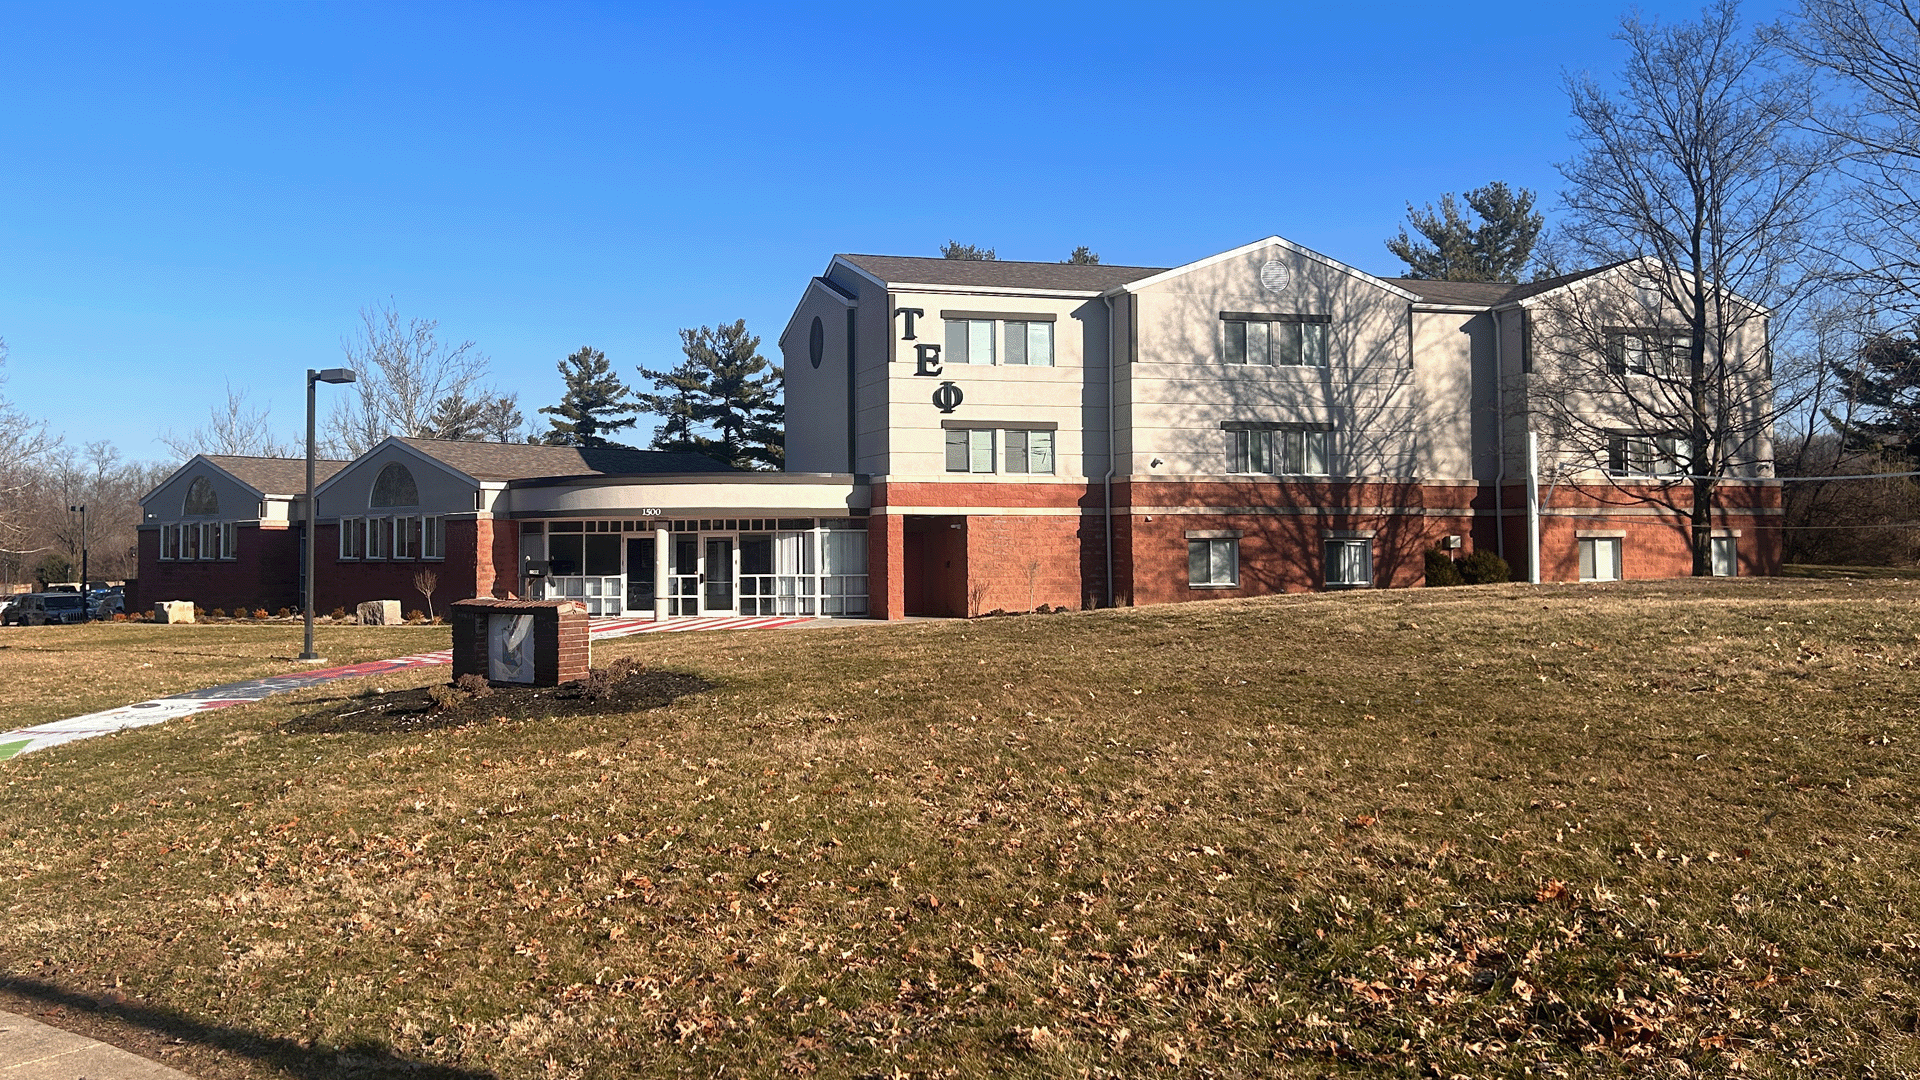 Tau Epsilon Phi joins list of fraternities on cease and desist for hazing